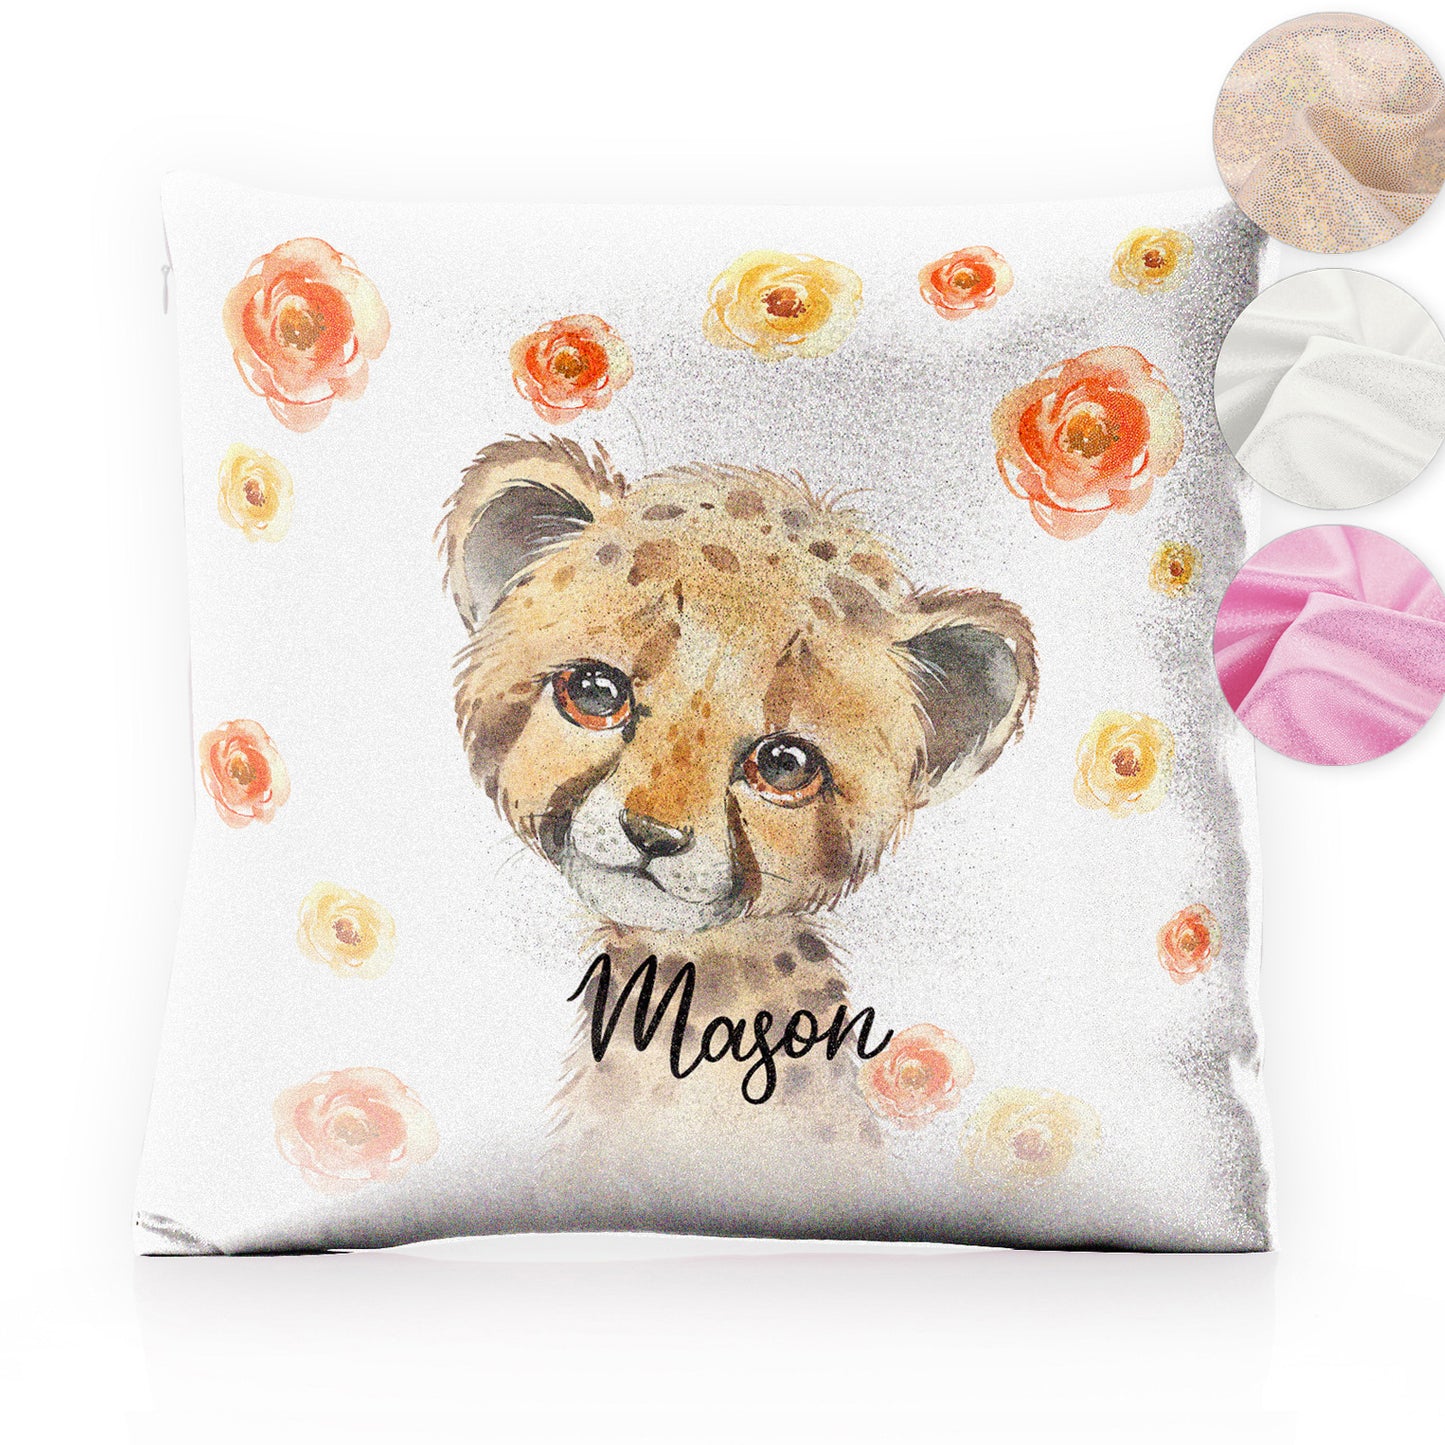 Personalised Glitter Cushion with Spotty Leopard Cat Red and Yellow Flowers and Cute Text